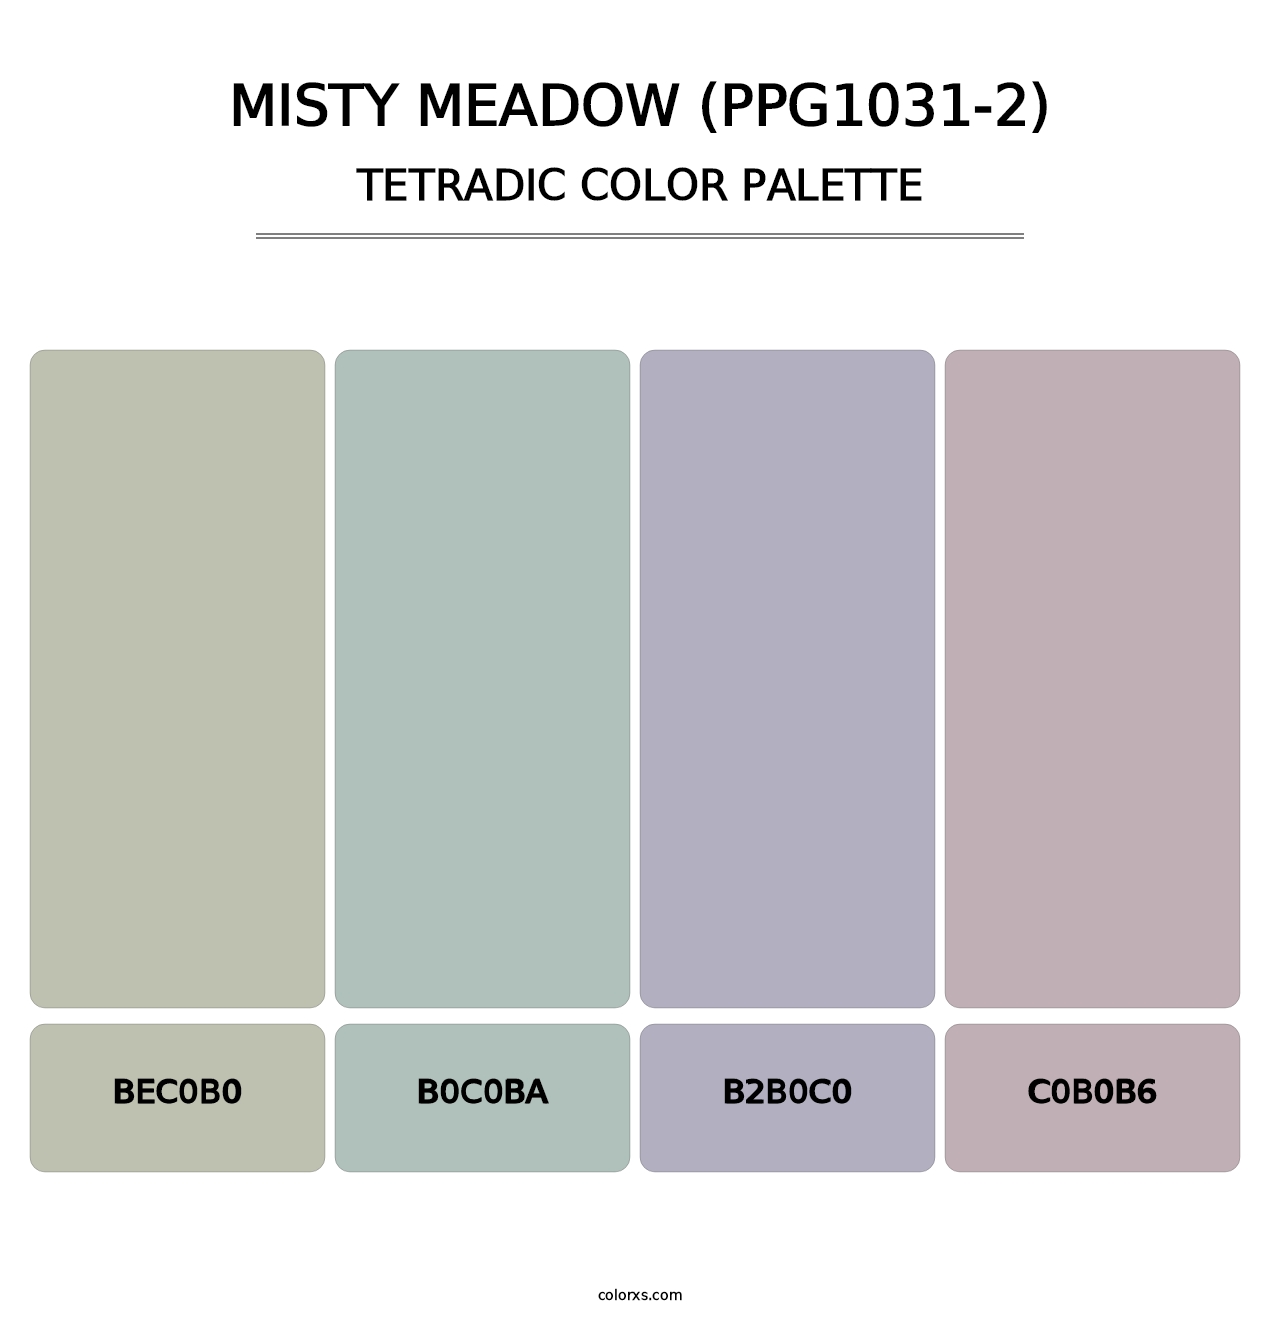 Misty Meadow (PPG1031-2) - Tetradic Color Palette